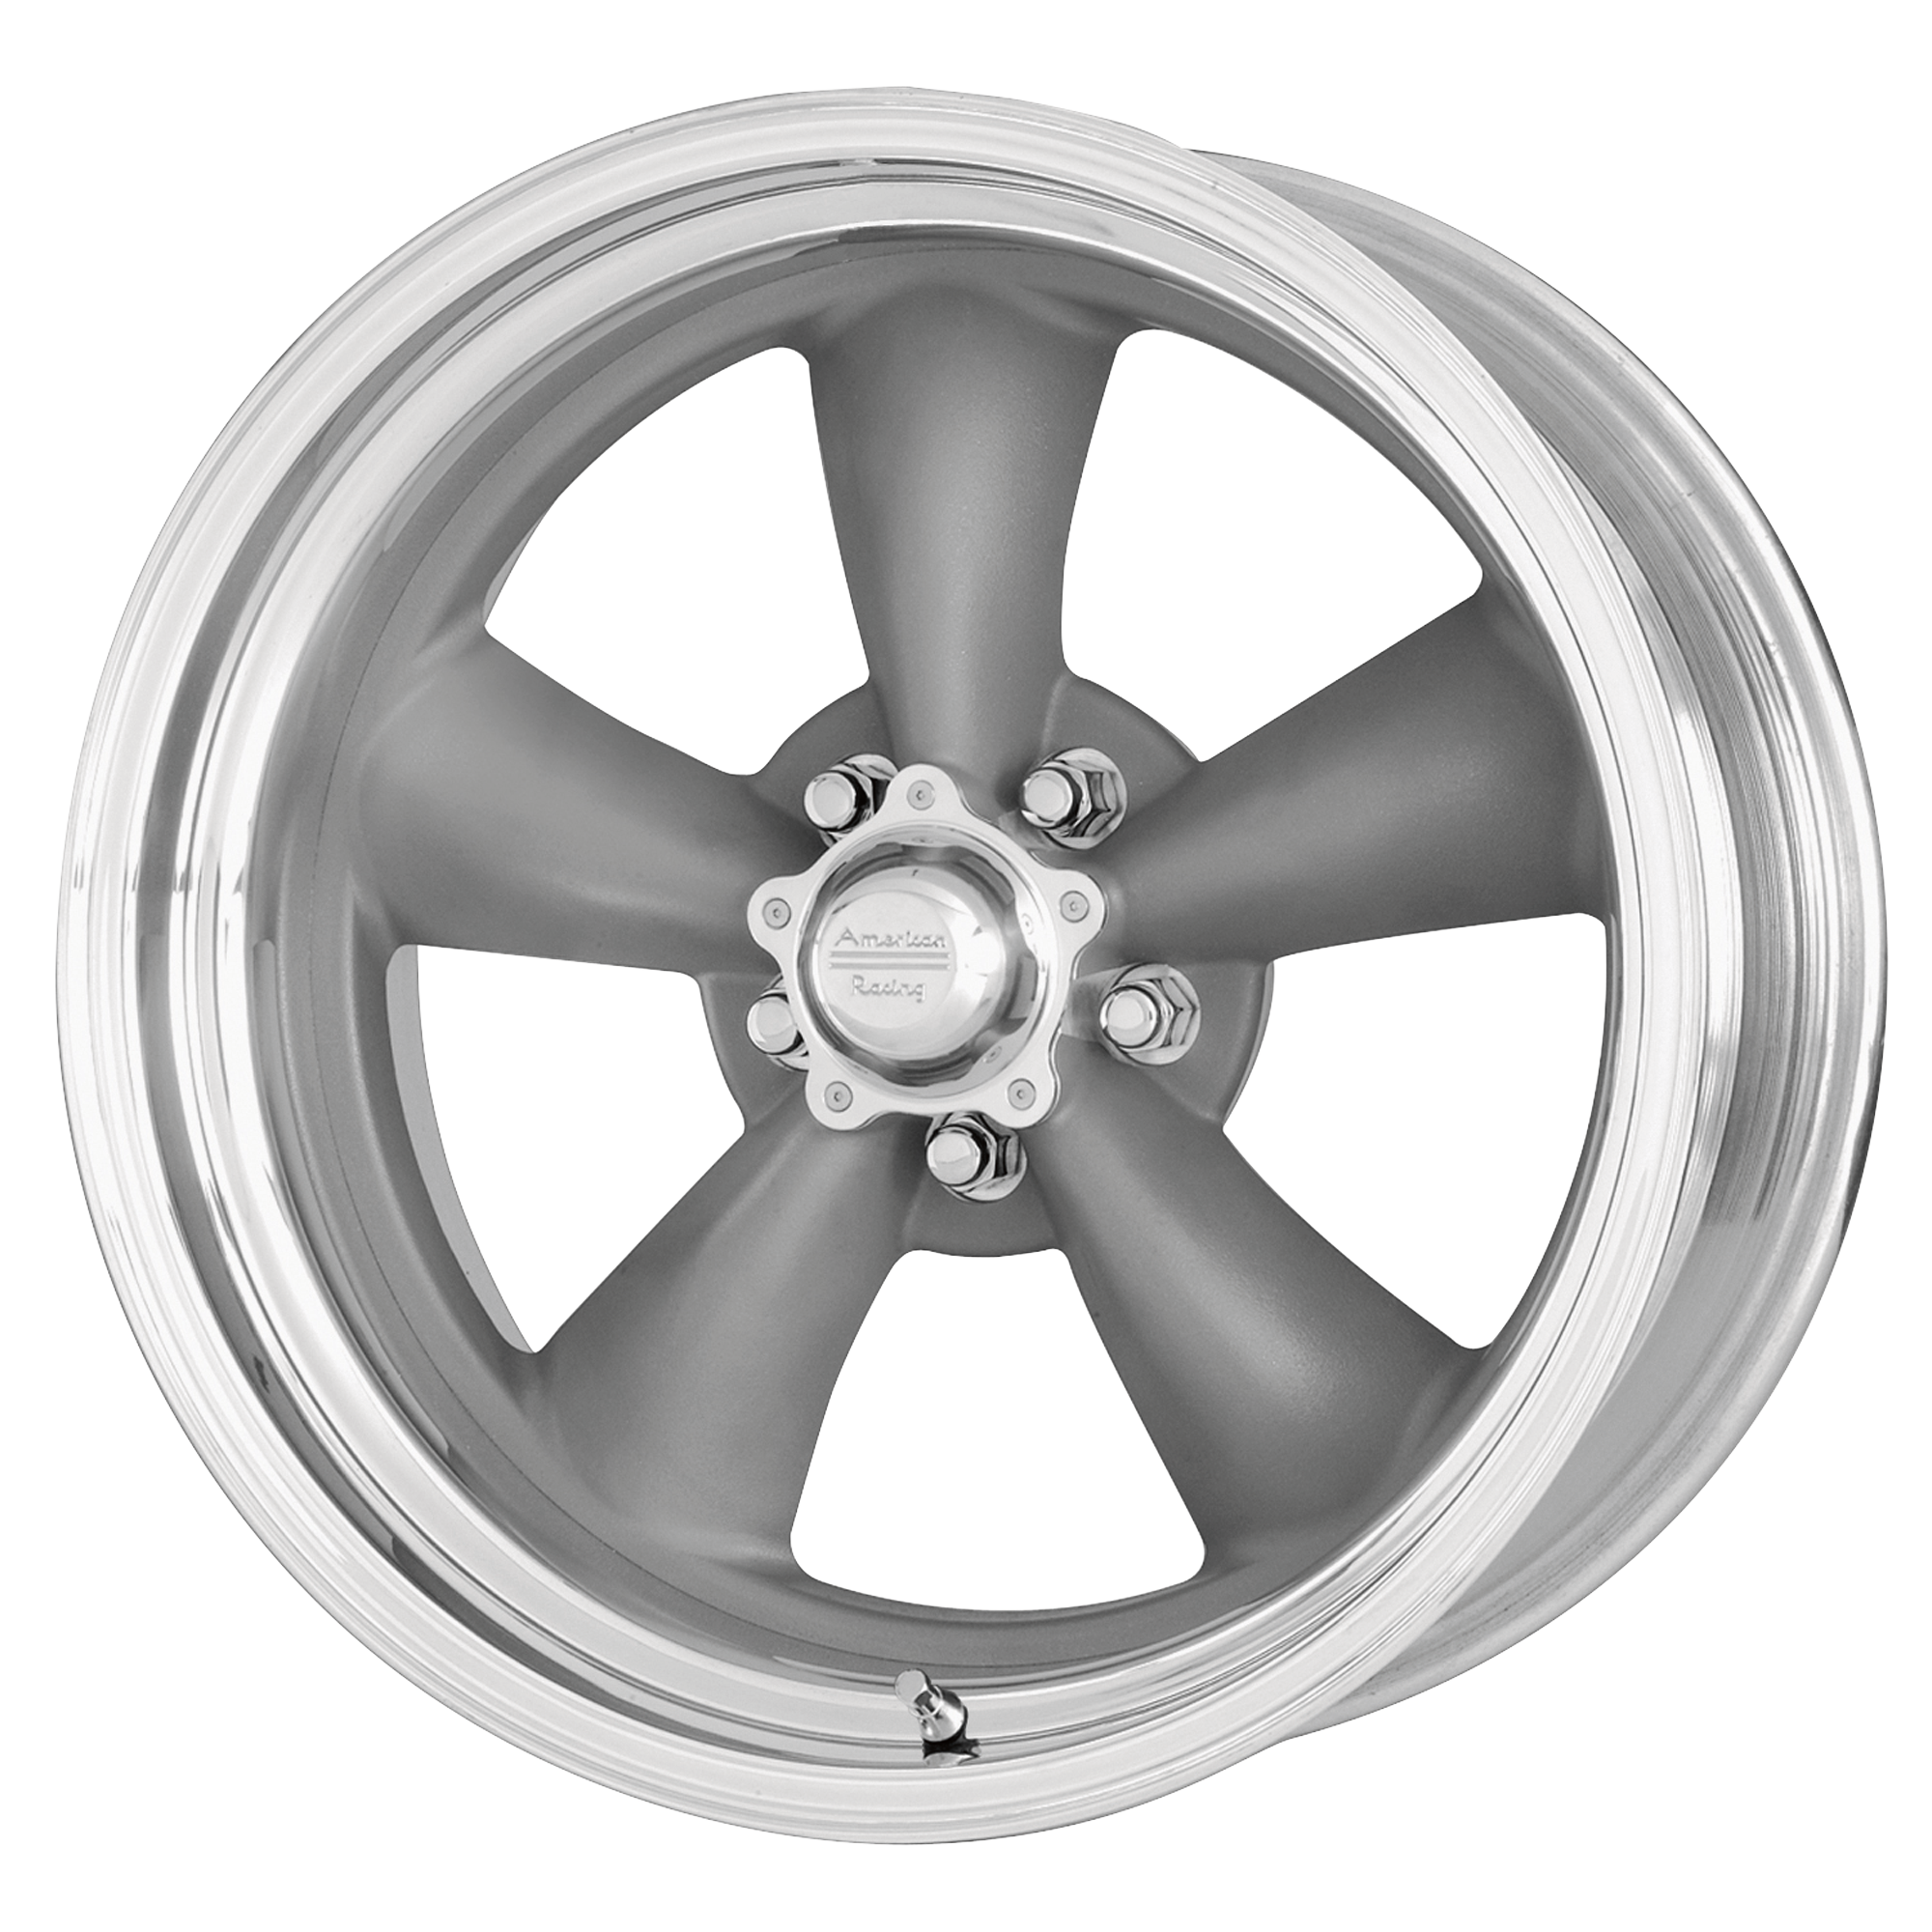 CLASSIC TORQ THRUST II ONE PIECE 17x9.5 5x120.65 MAG GRAY W/ MACHINED LIP (46 mm) - Tires and Engine Performance